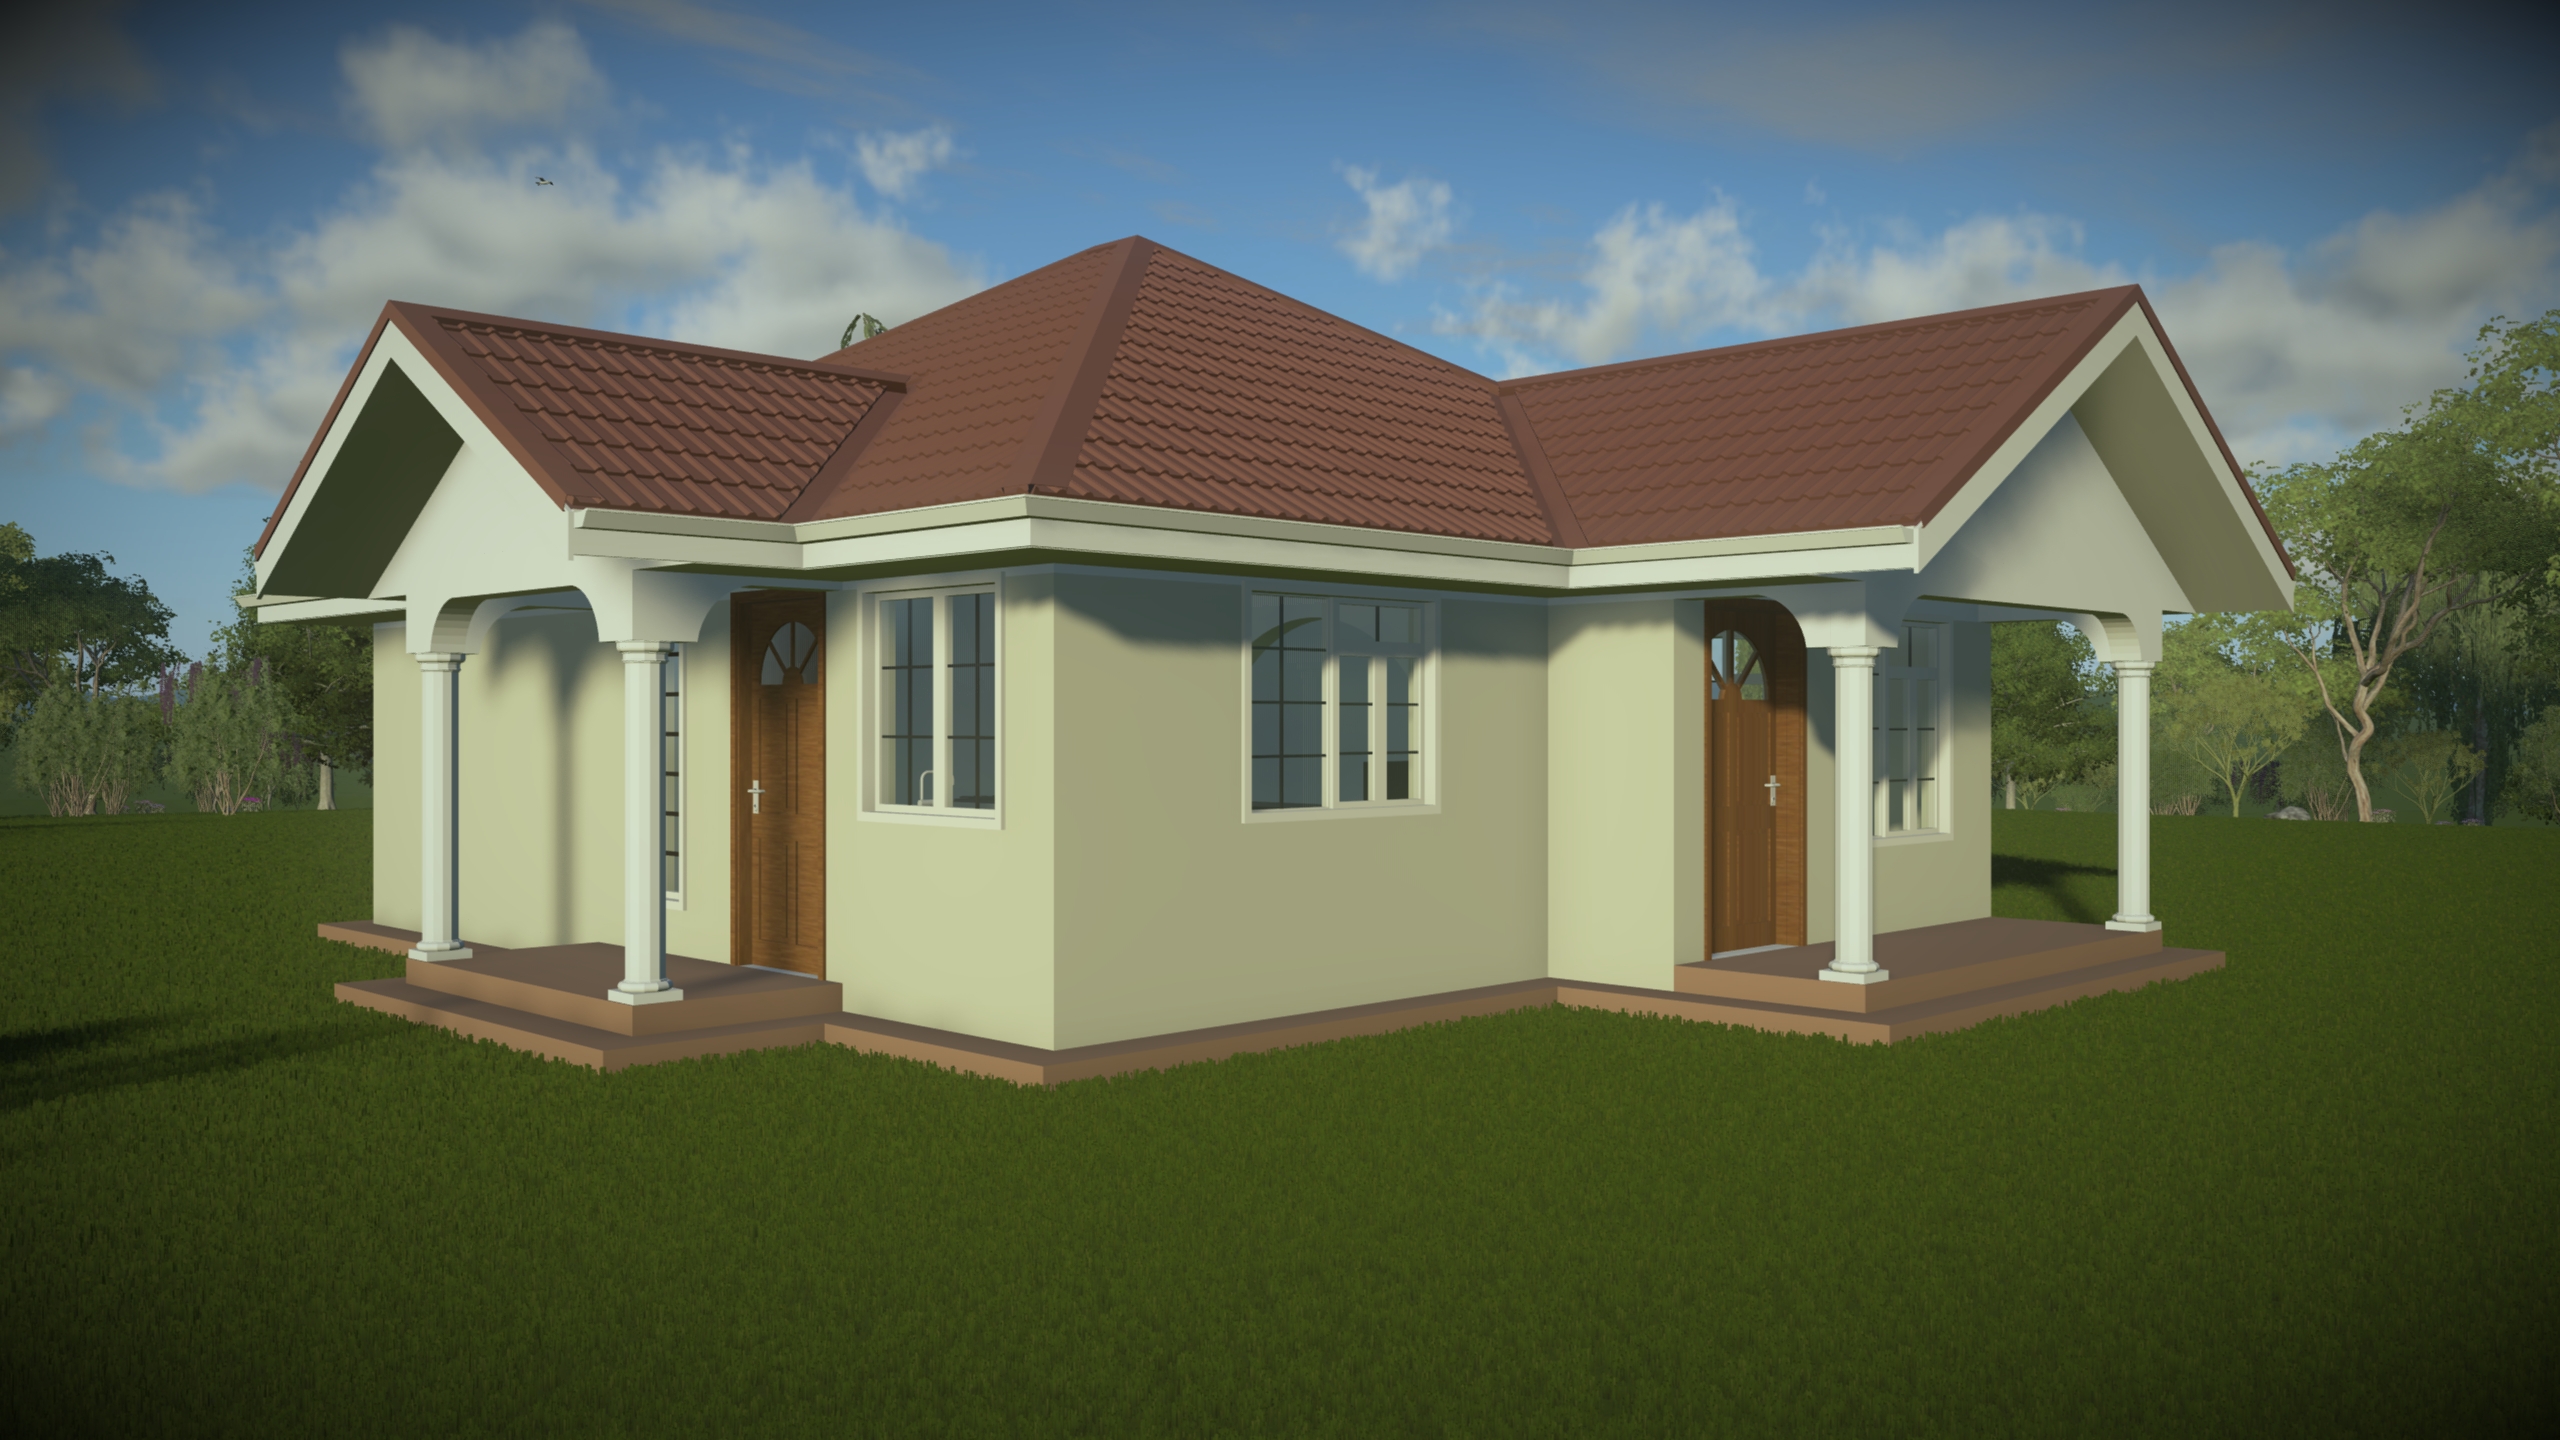 A Magnificent Three Bedroom House Plan